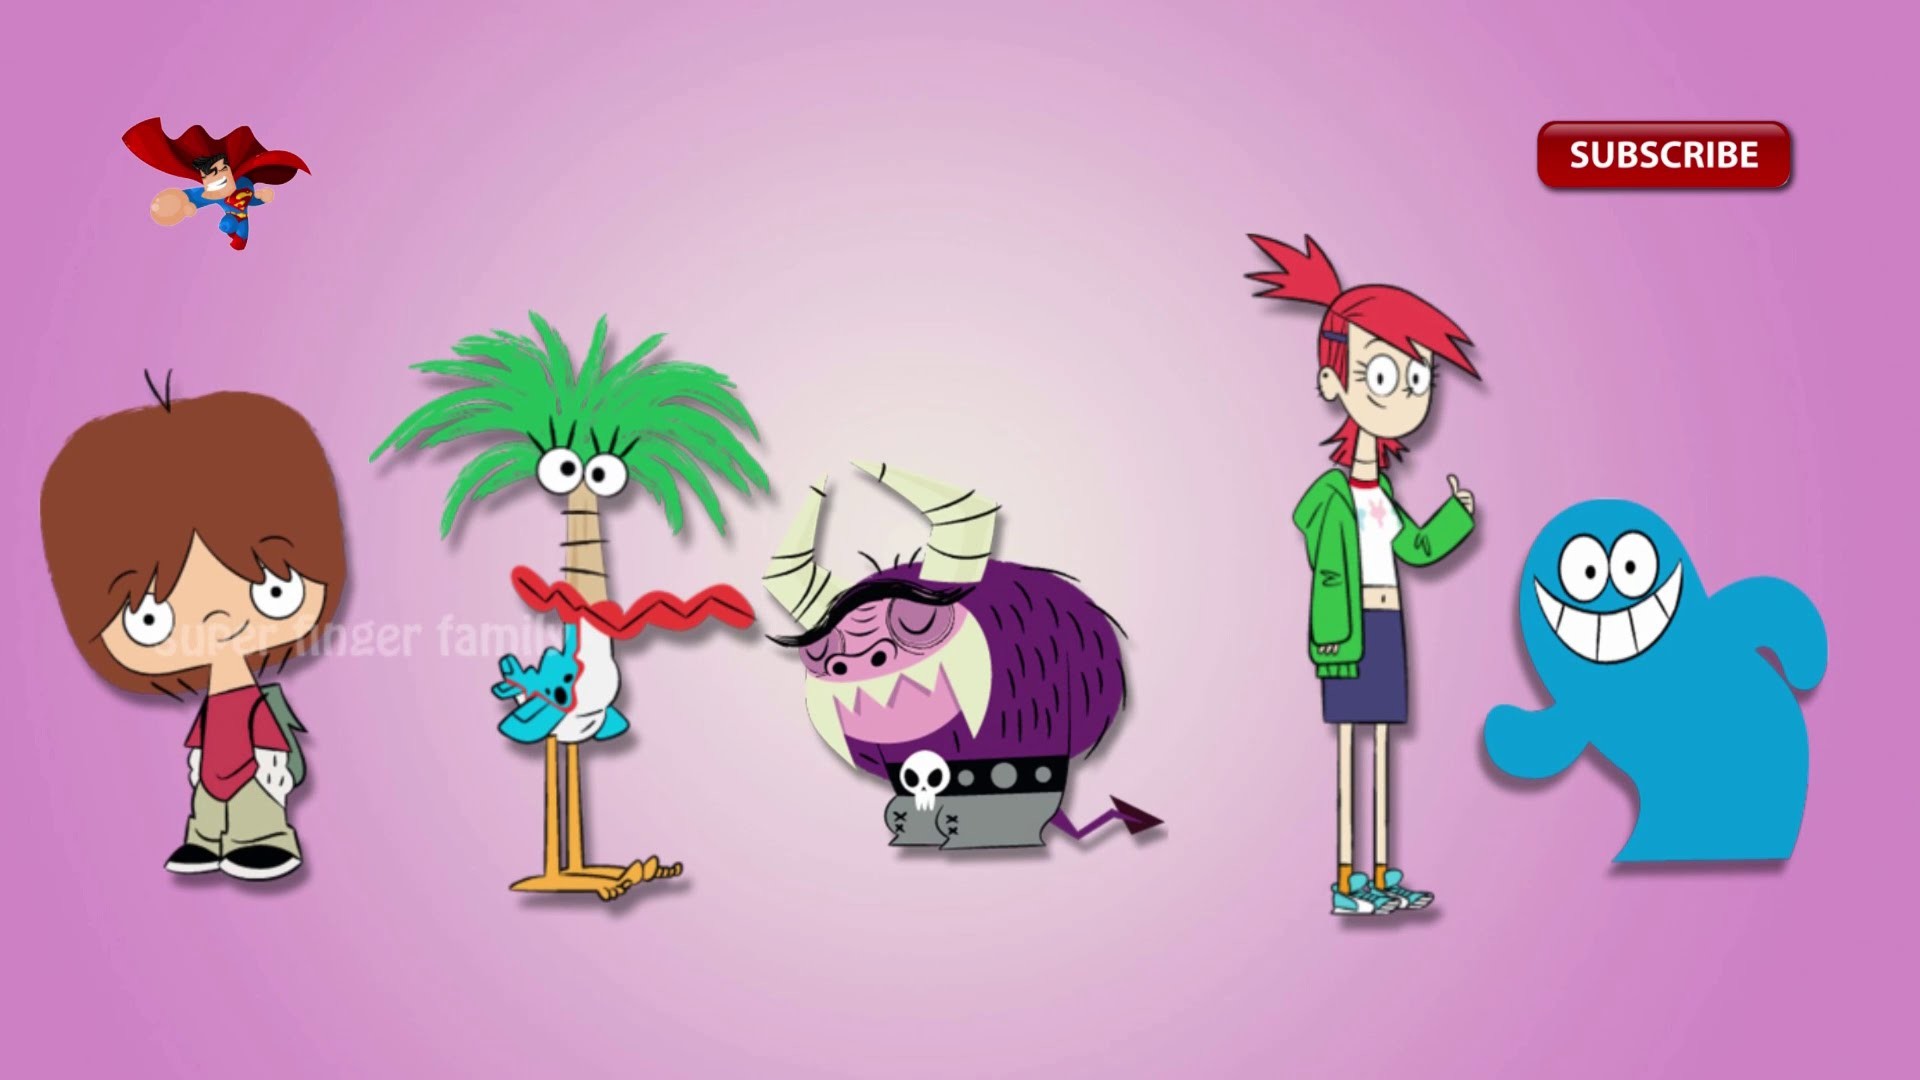 Foster's Home For Imaginary Friends